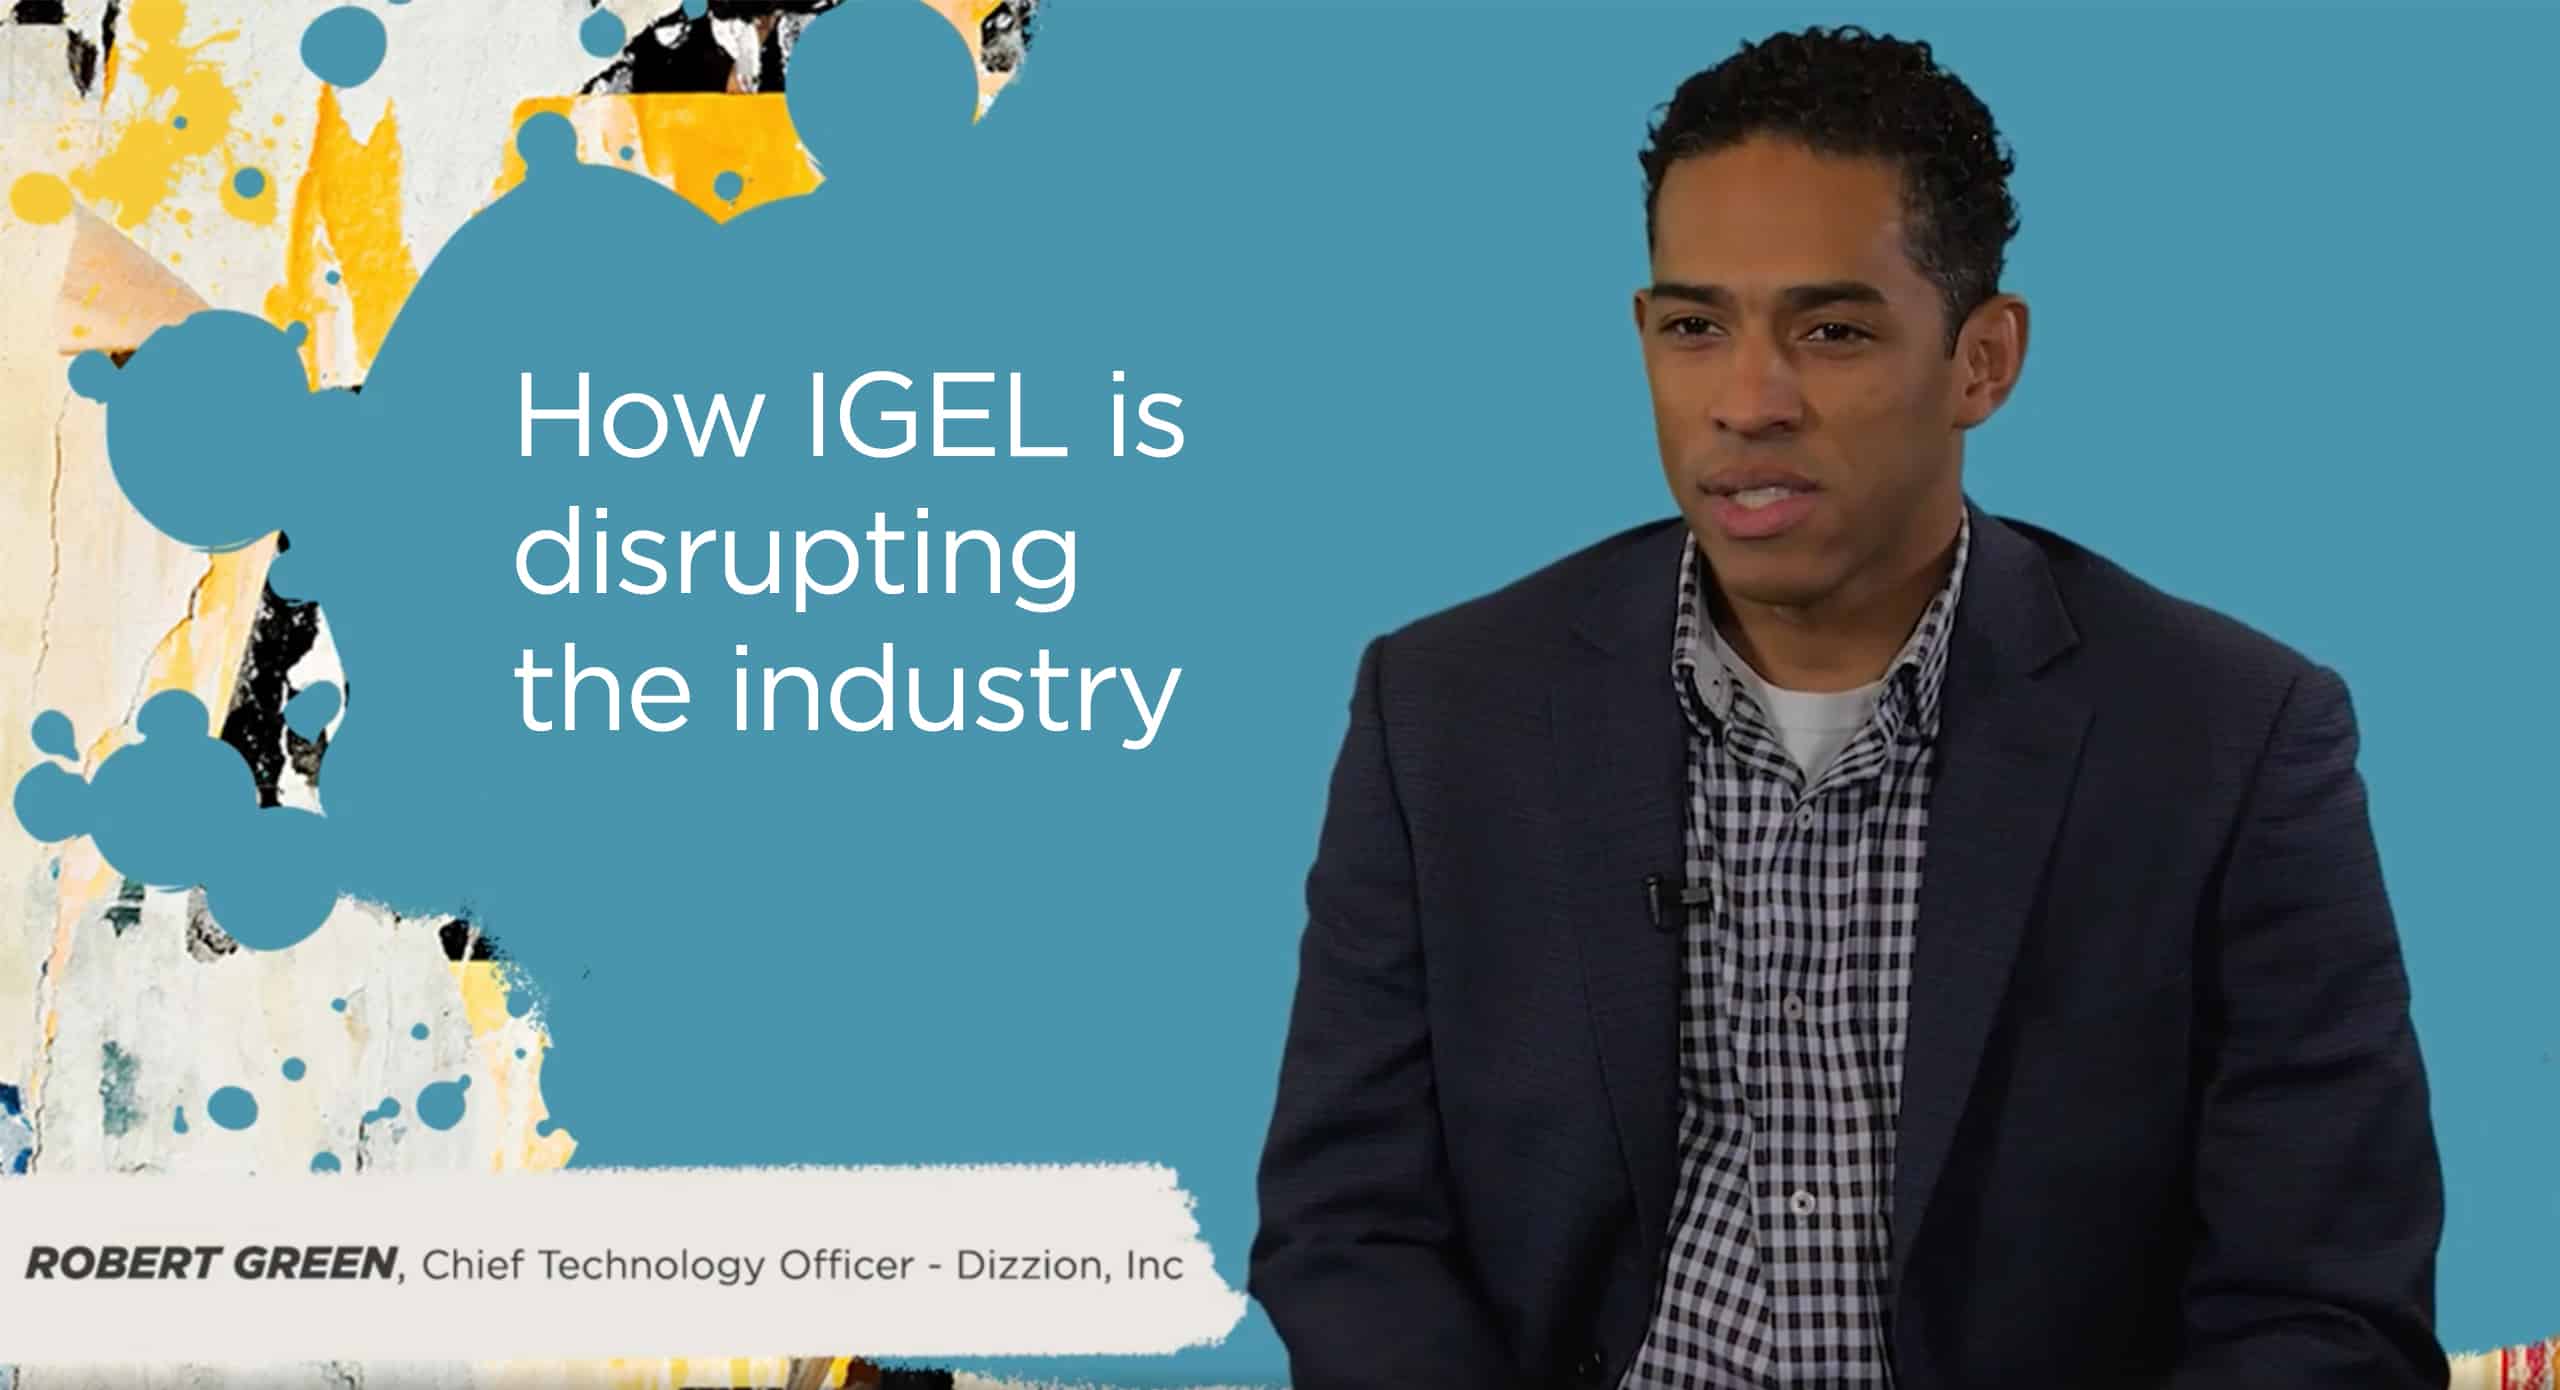 How IGEL is disrupting the industry